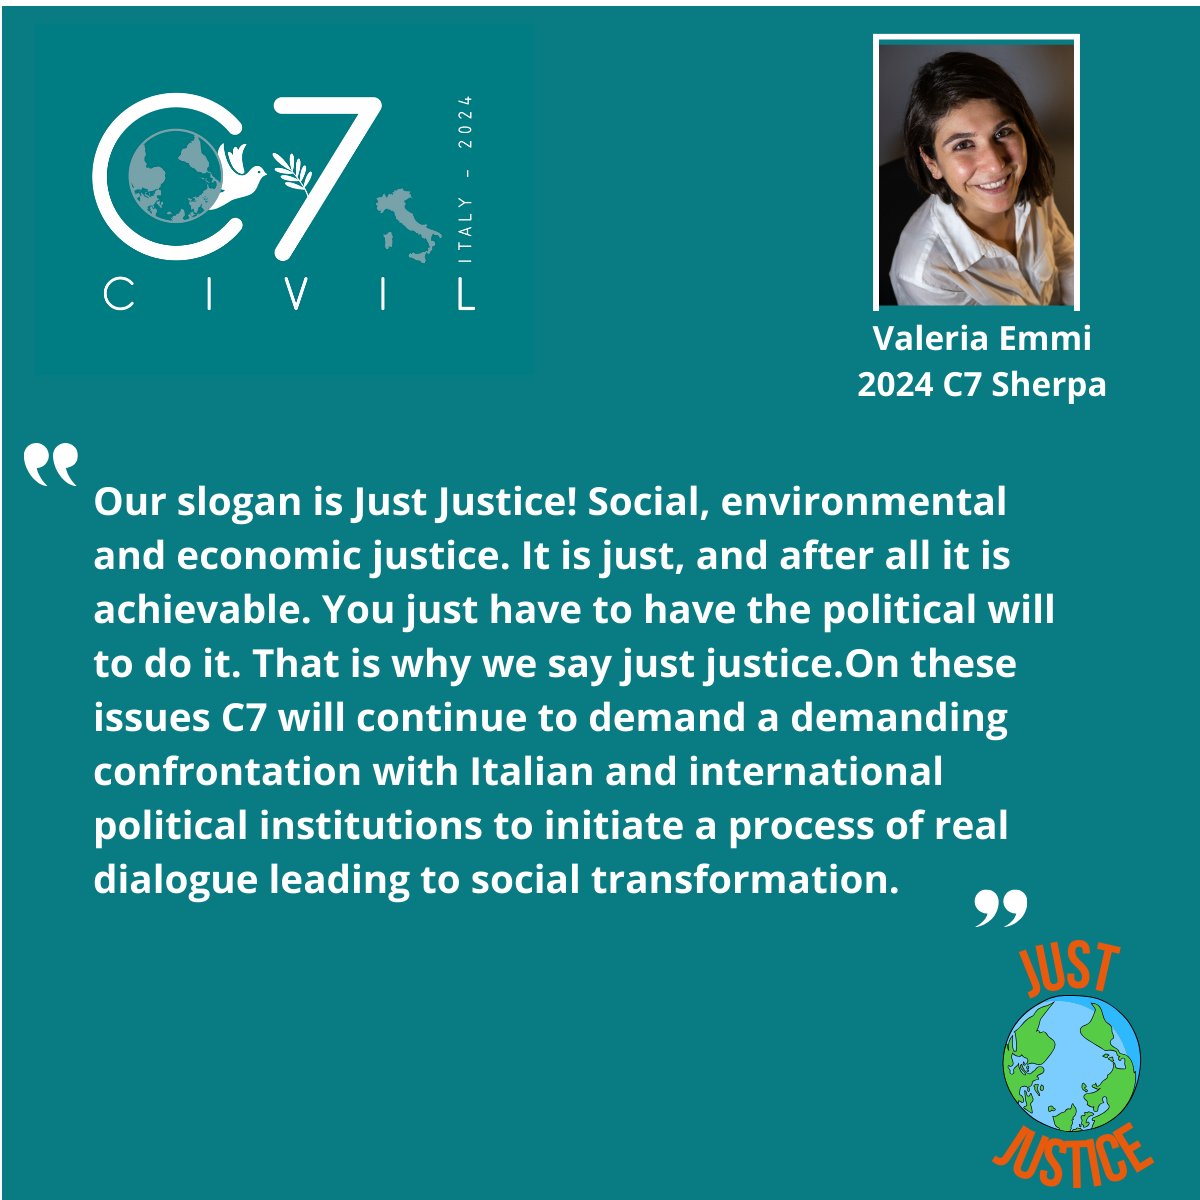 🛑 𝐉𝐔𝐒𝐓 𝐉𝐔𝐒𝐓𝐈𝐂𝐄 👇 We engage with passion for a more human world

#civil72024, #civil7italy, #civil7ita, #G7Italy, #g7ita, #g72024, #JustJustice